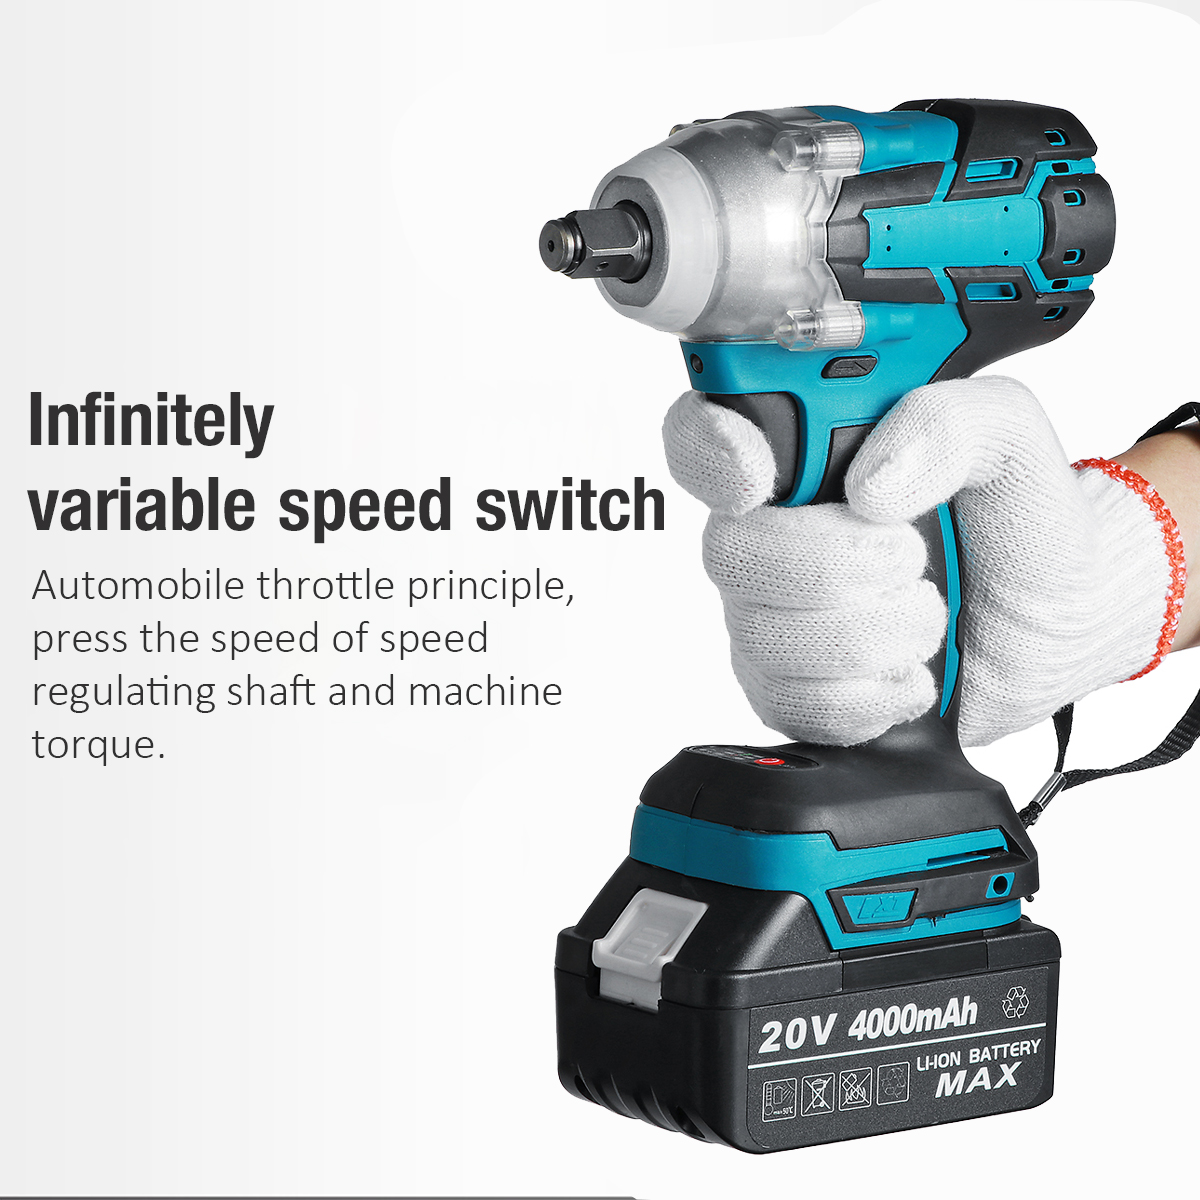 100-240V-20V-520Nm-4000RPM-Brushless-Electric-Impact-Wrench-Cordless-12quot-Power-Tool-For-Makita-Ba-1805406-4